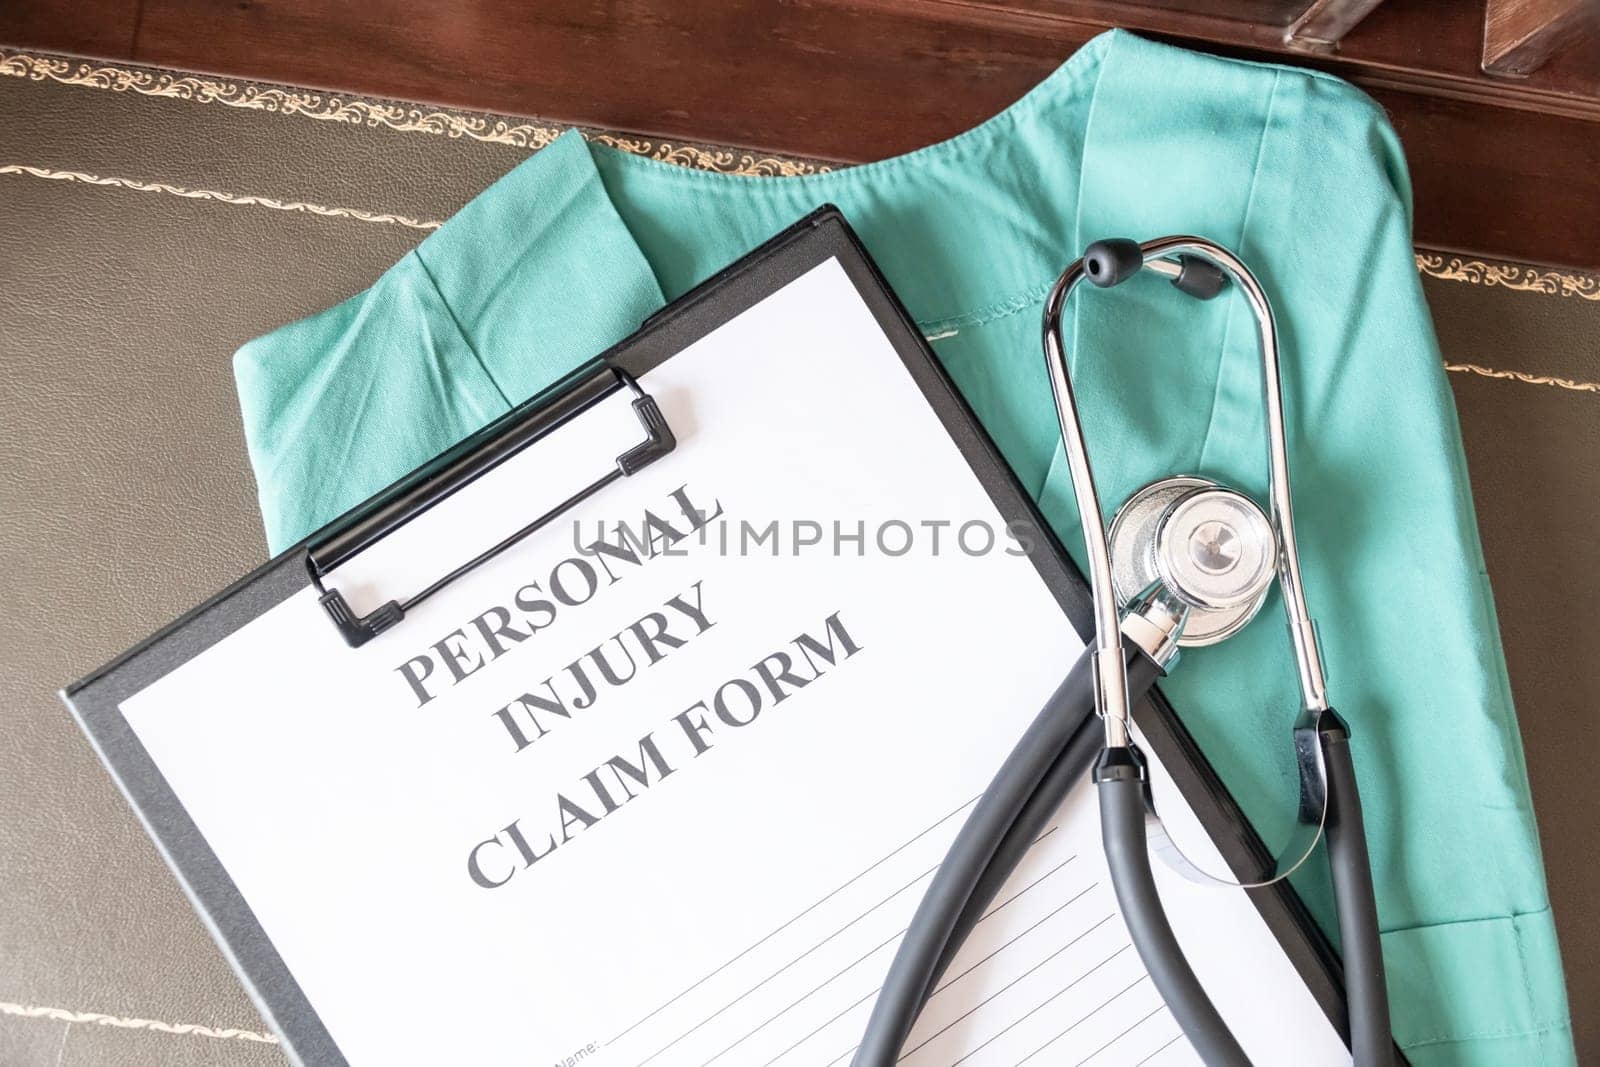 A personal injury claim form on a clipboard, accompanied by a stethoscope and medical scrubs, indicating health-related legal action. by jbruiz78